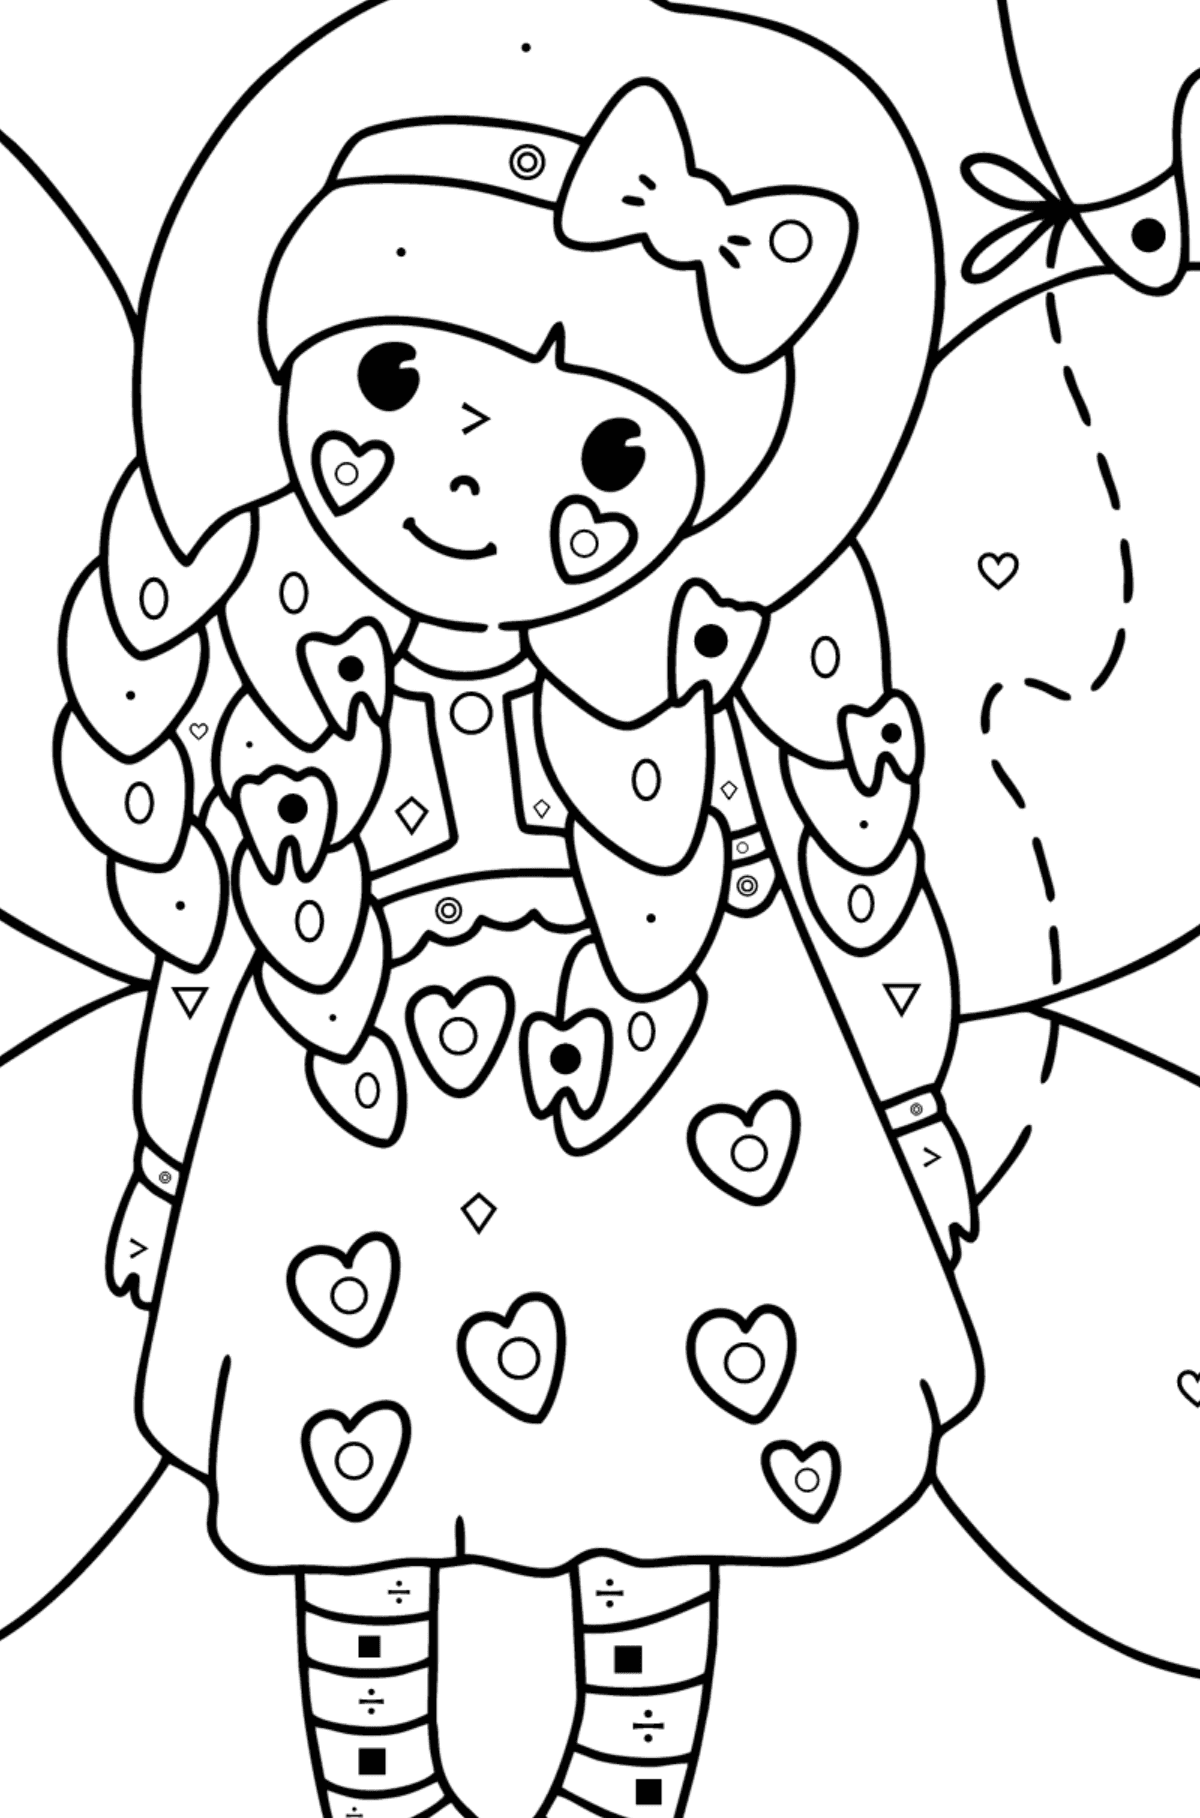 Tooth Fairy coloring page - Coloring by Symbols and Geometric Shapes for Kids